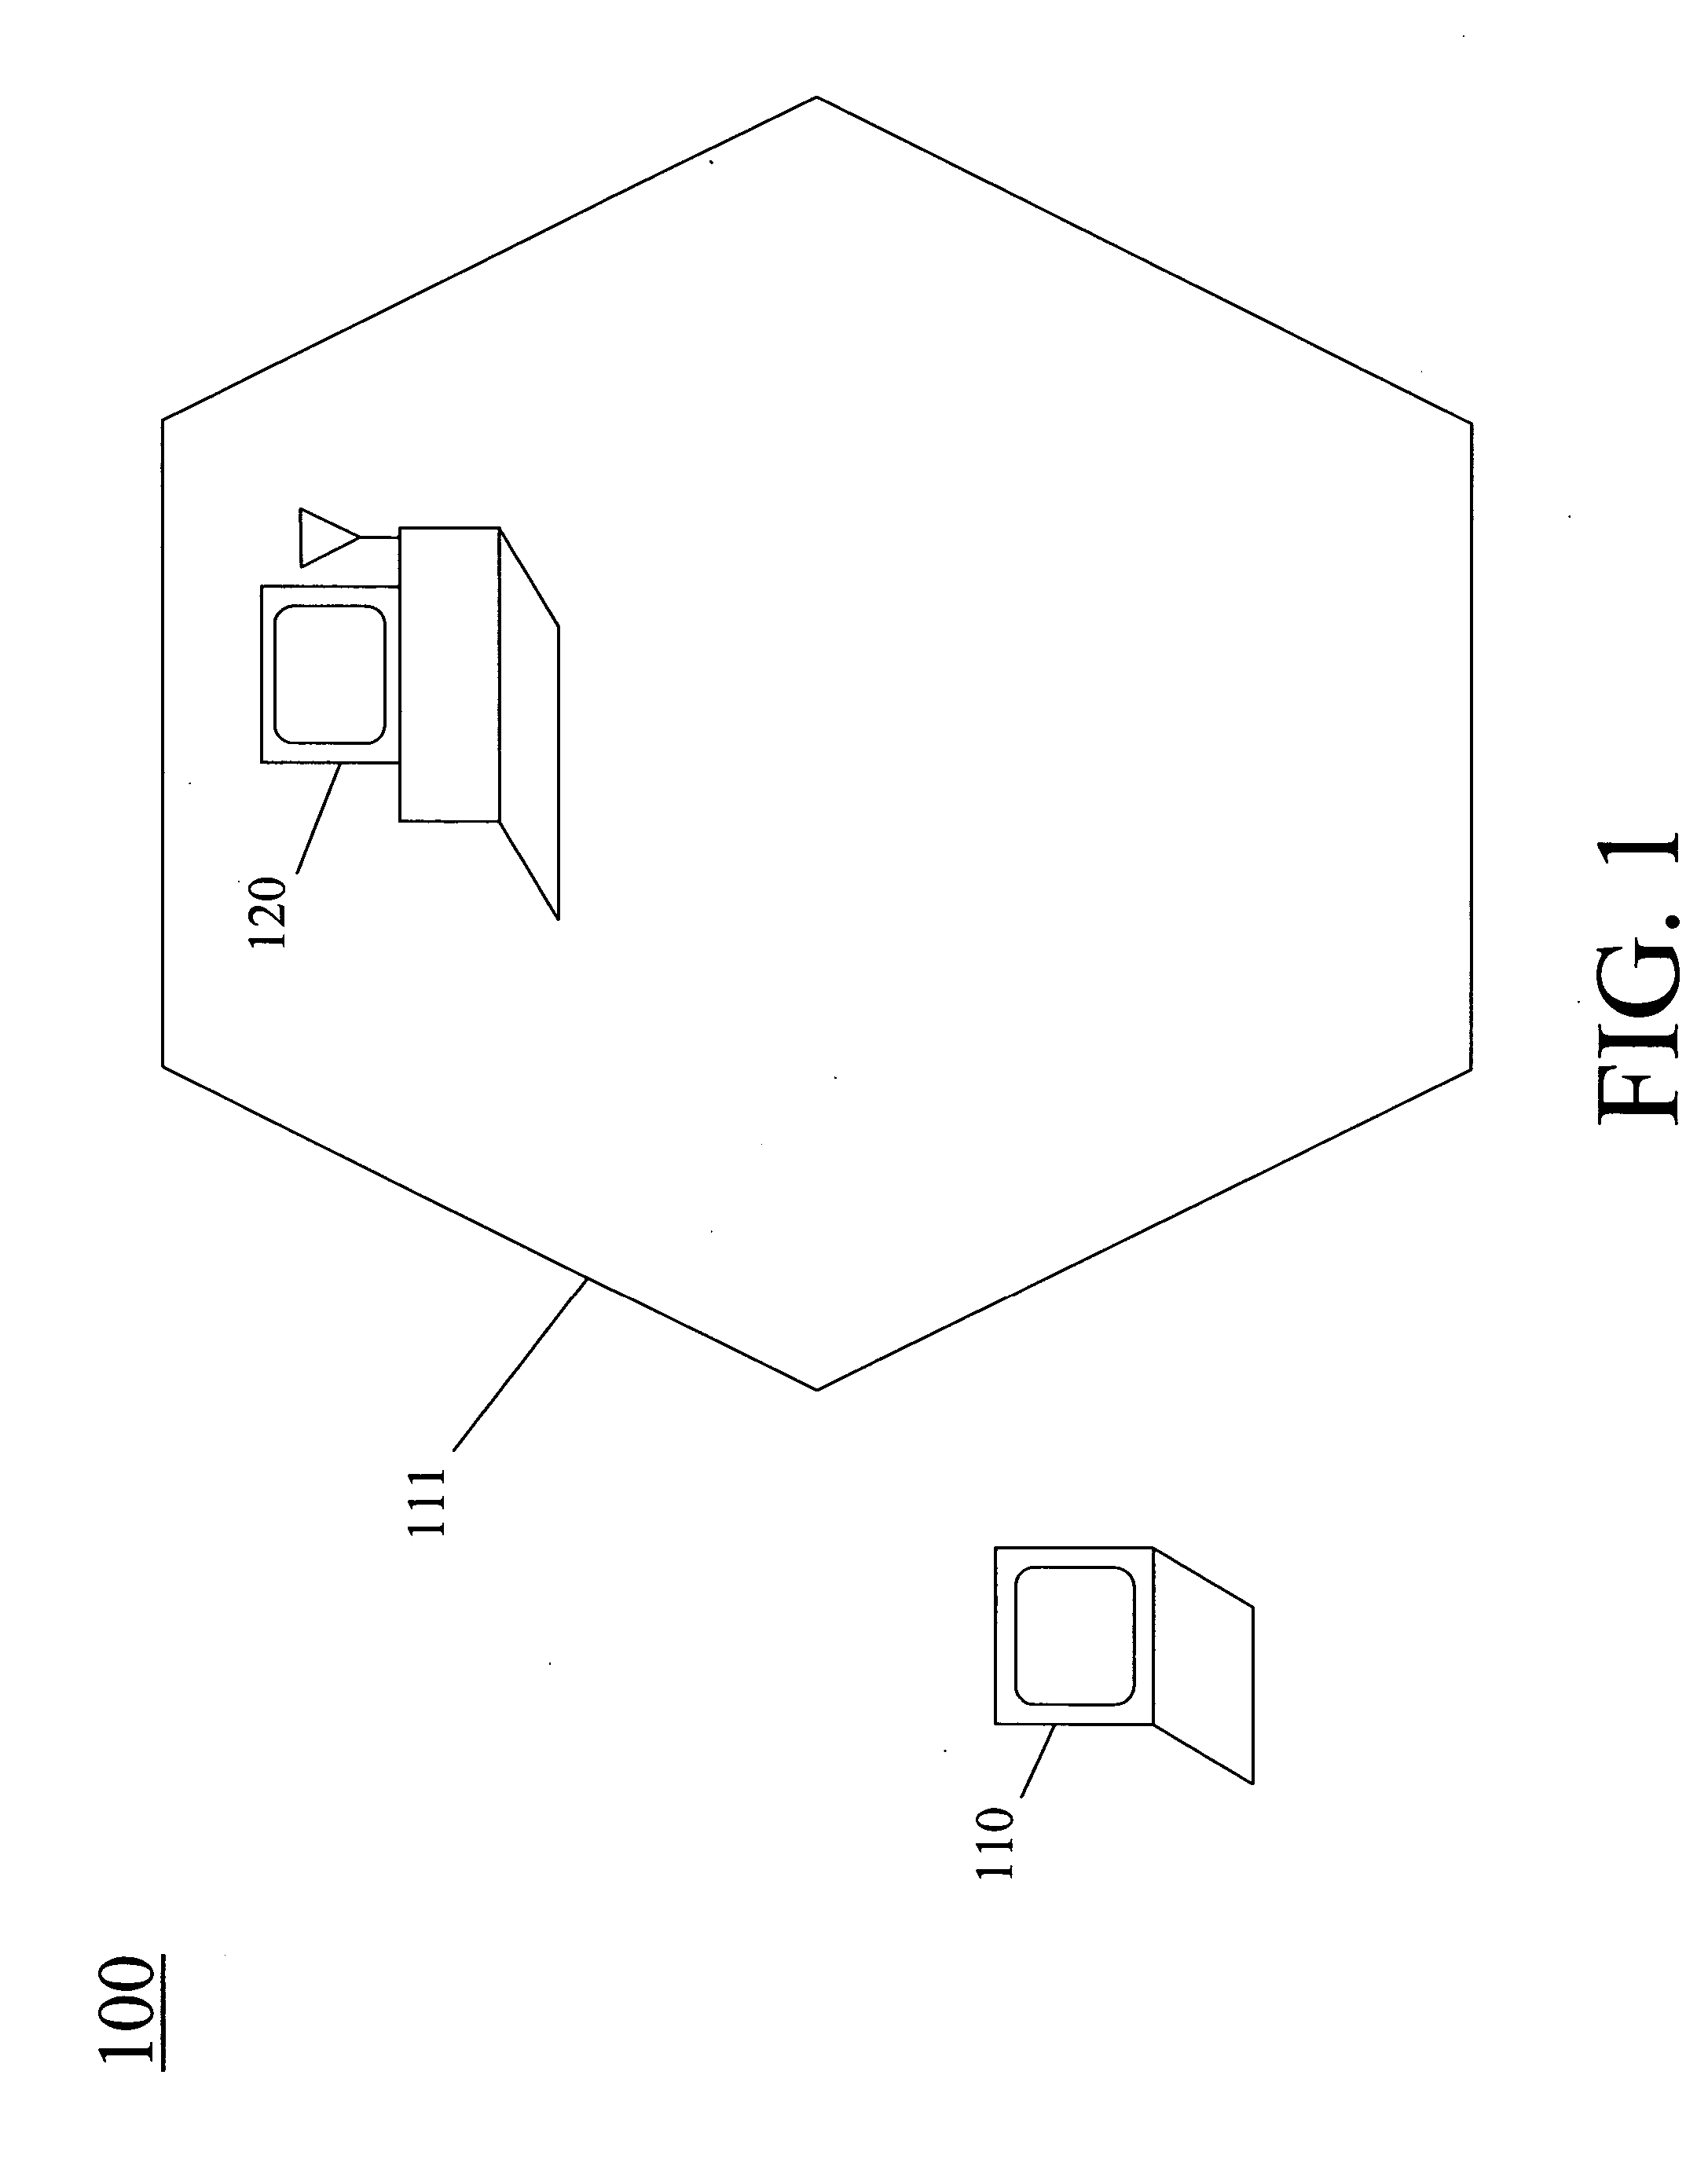 Method for disabling a computing device based on the location of the computing device